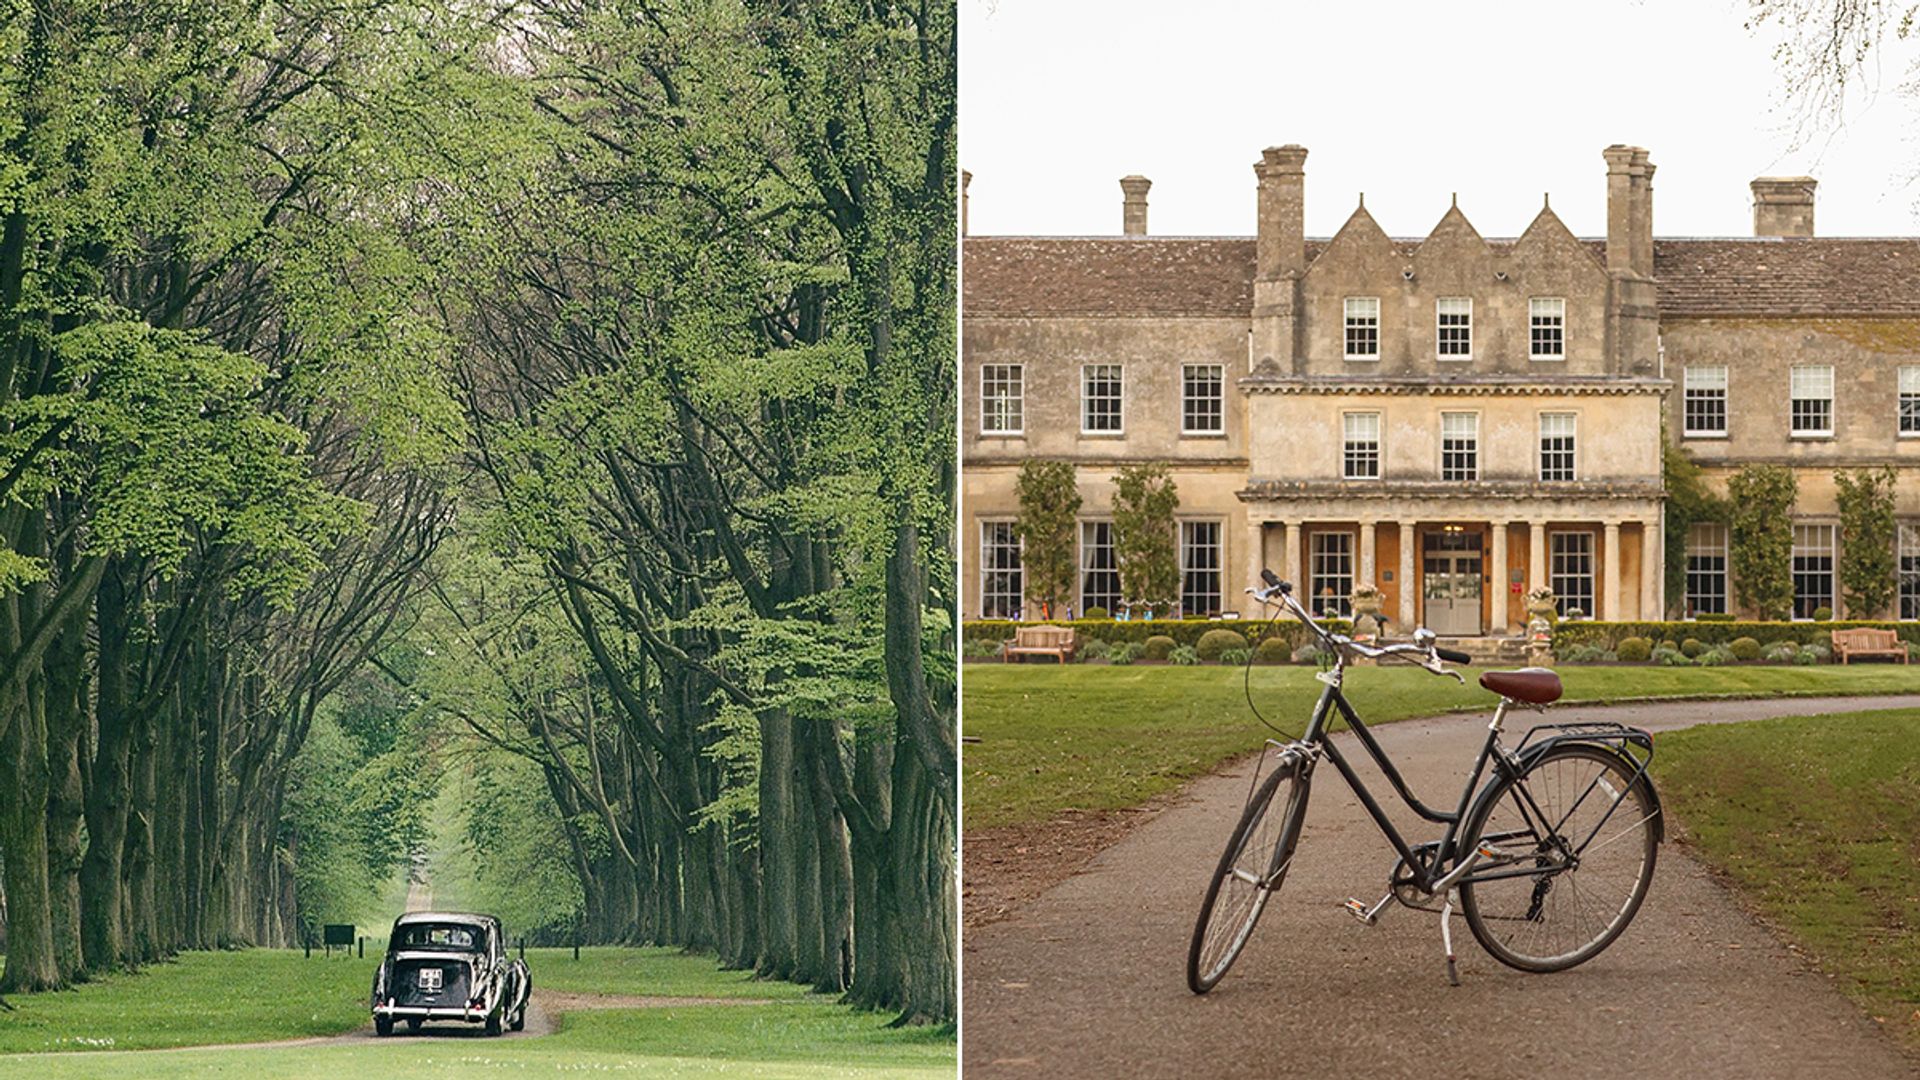 I fulfilled my Downton Abbey dreams at the historic Lucknam Park Hotel & Spa - and have never felt more relaxed